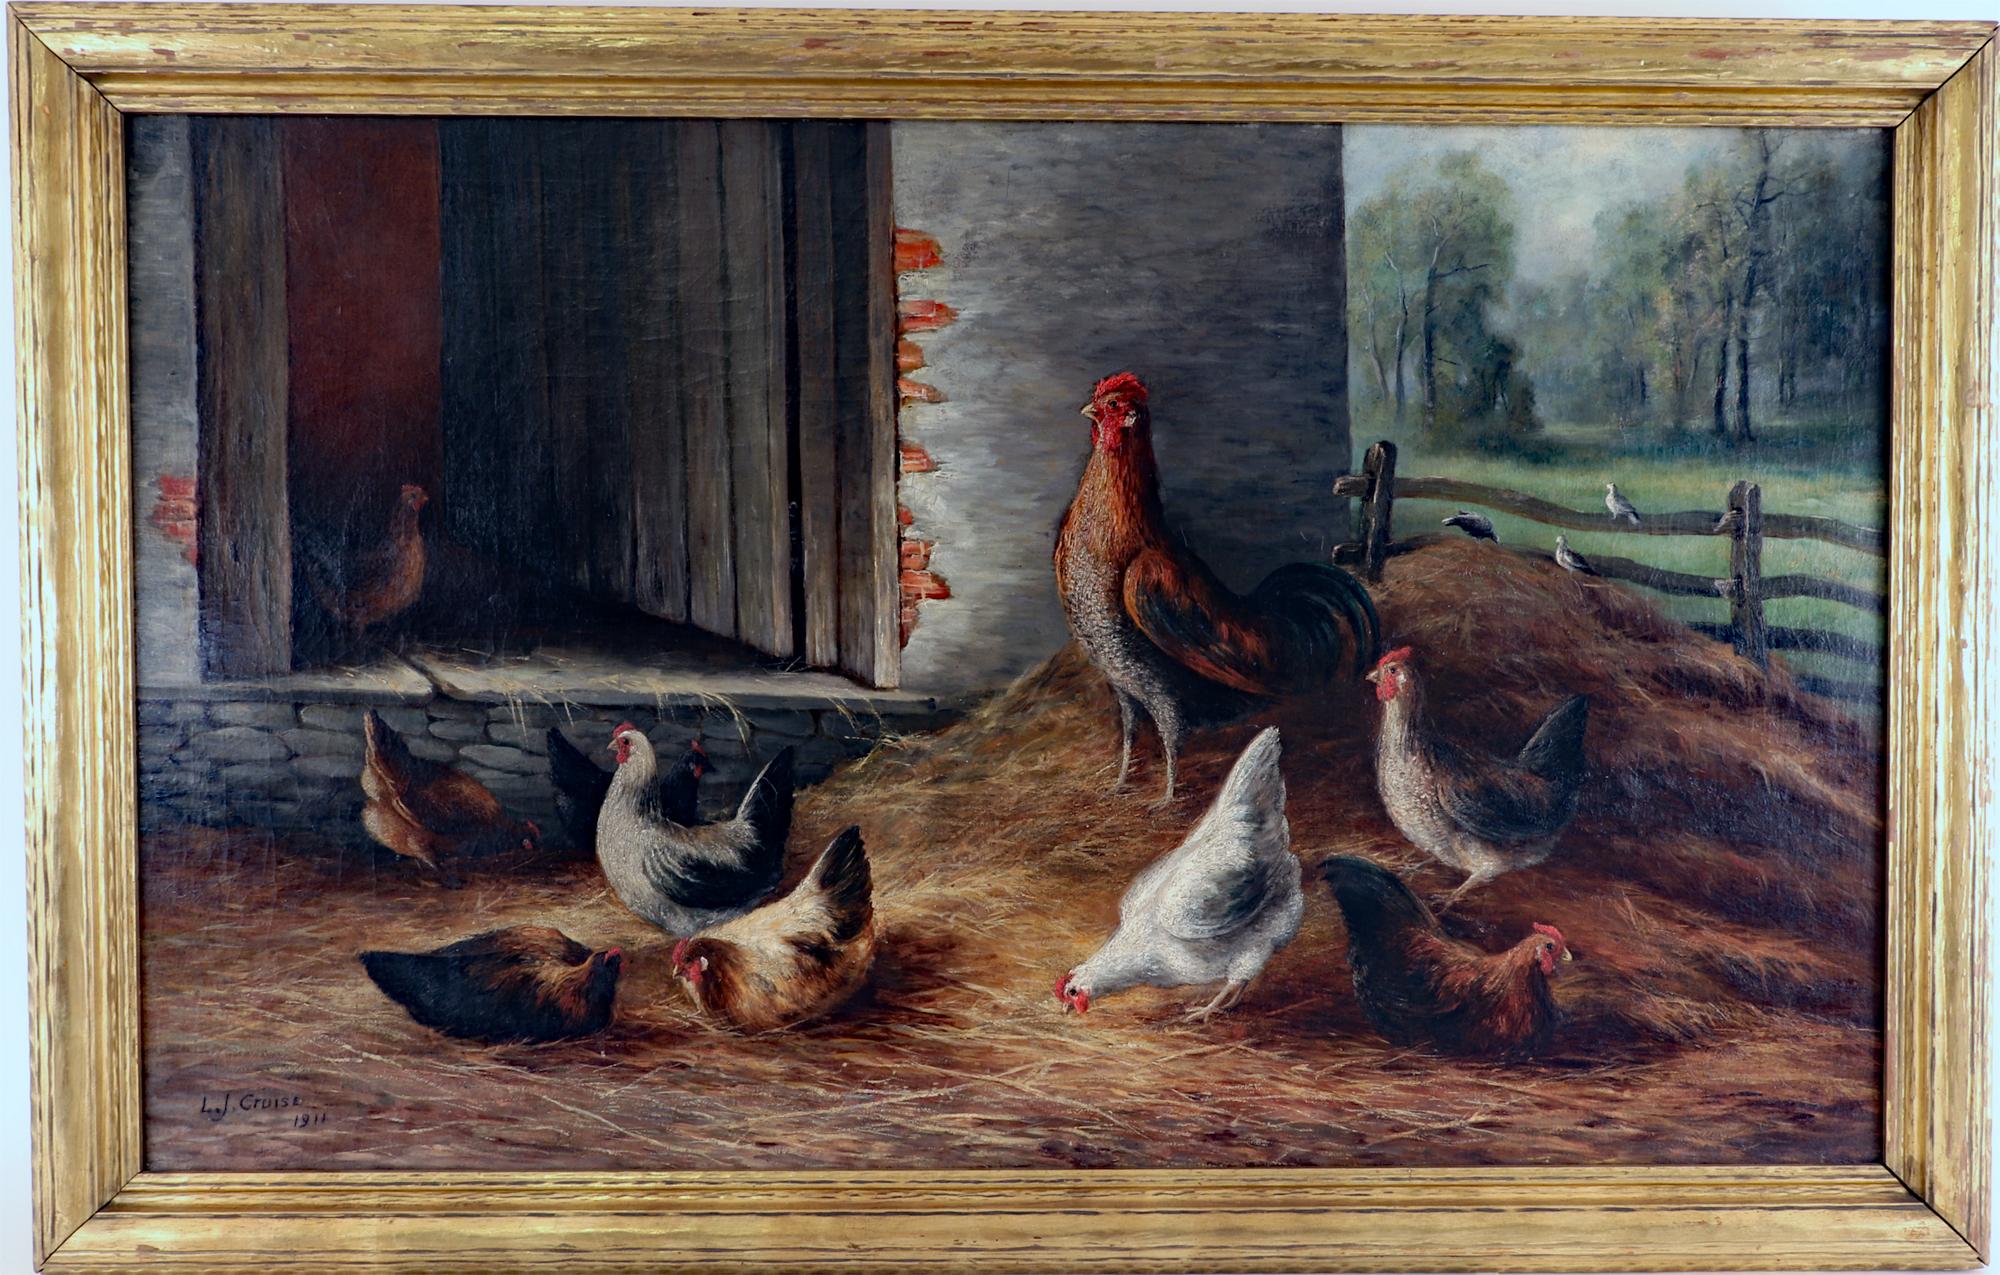 Farmyard Scene with Chickens,
Medium: Oil on canvas,
Signed: L.J. Cruise, 1911, Criuise (1861-1945), Berks County, Pennsylvania

Dimensions: Frame: 35 inches high x 55 31/2 inches wide; sight: 29 inches high x 48 3/4 inches wide

This oil